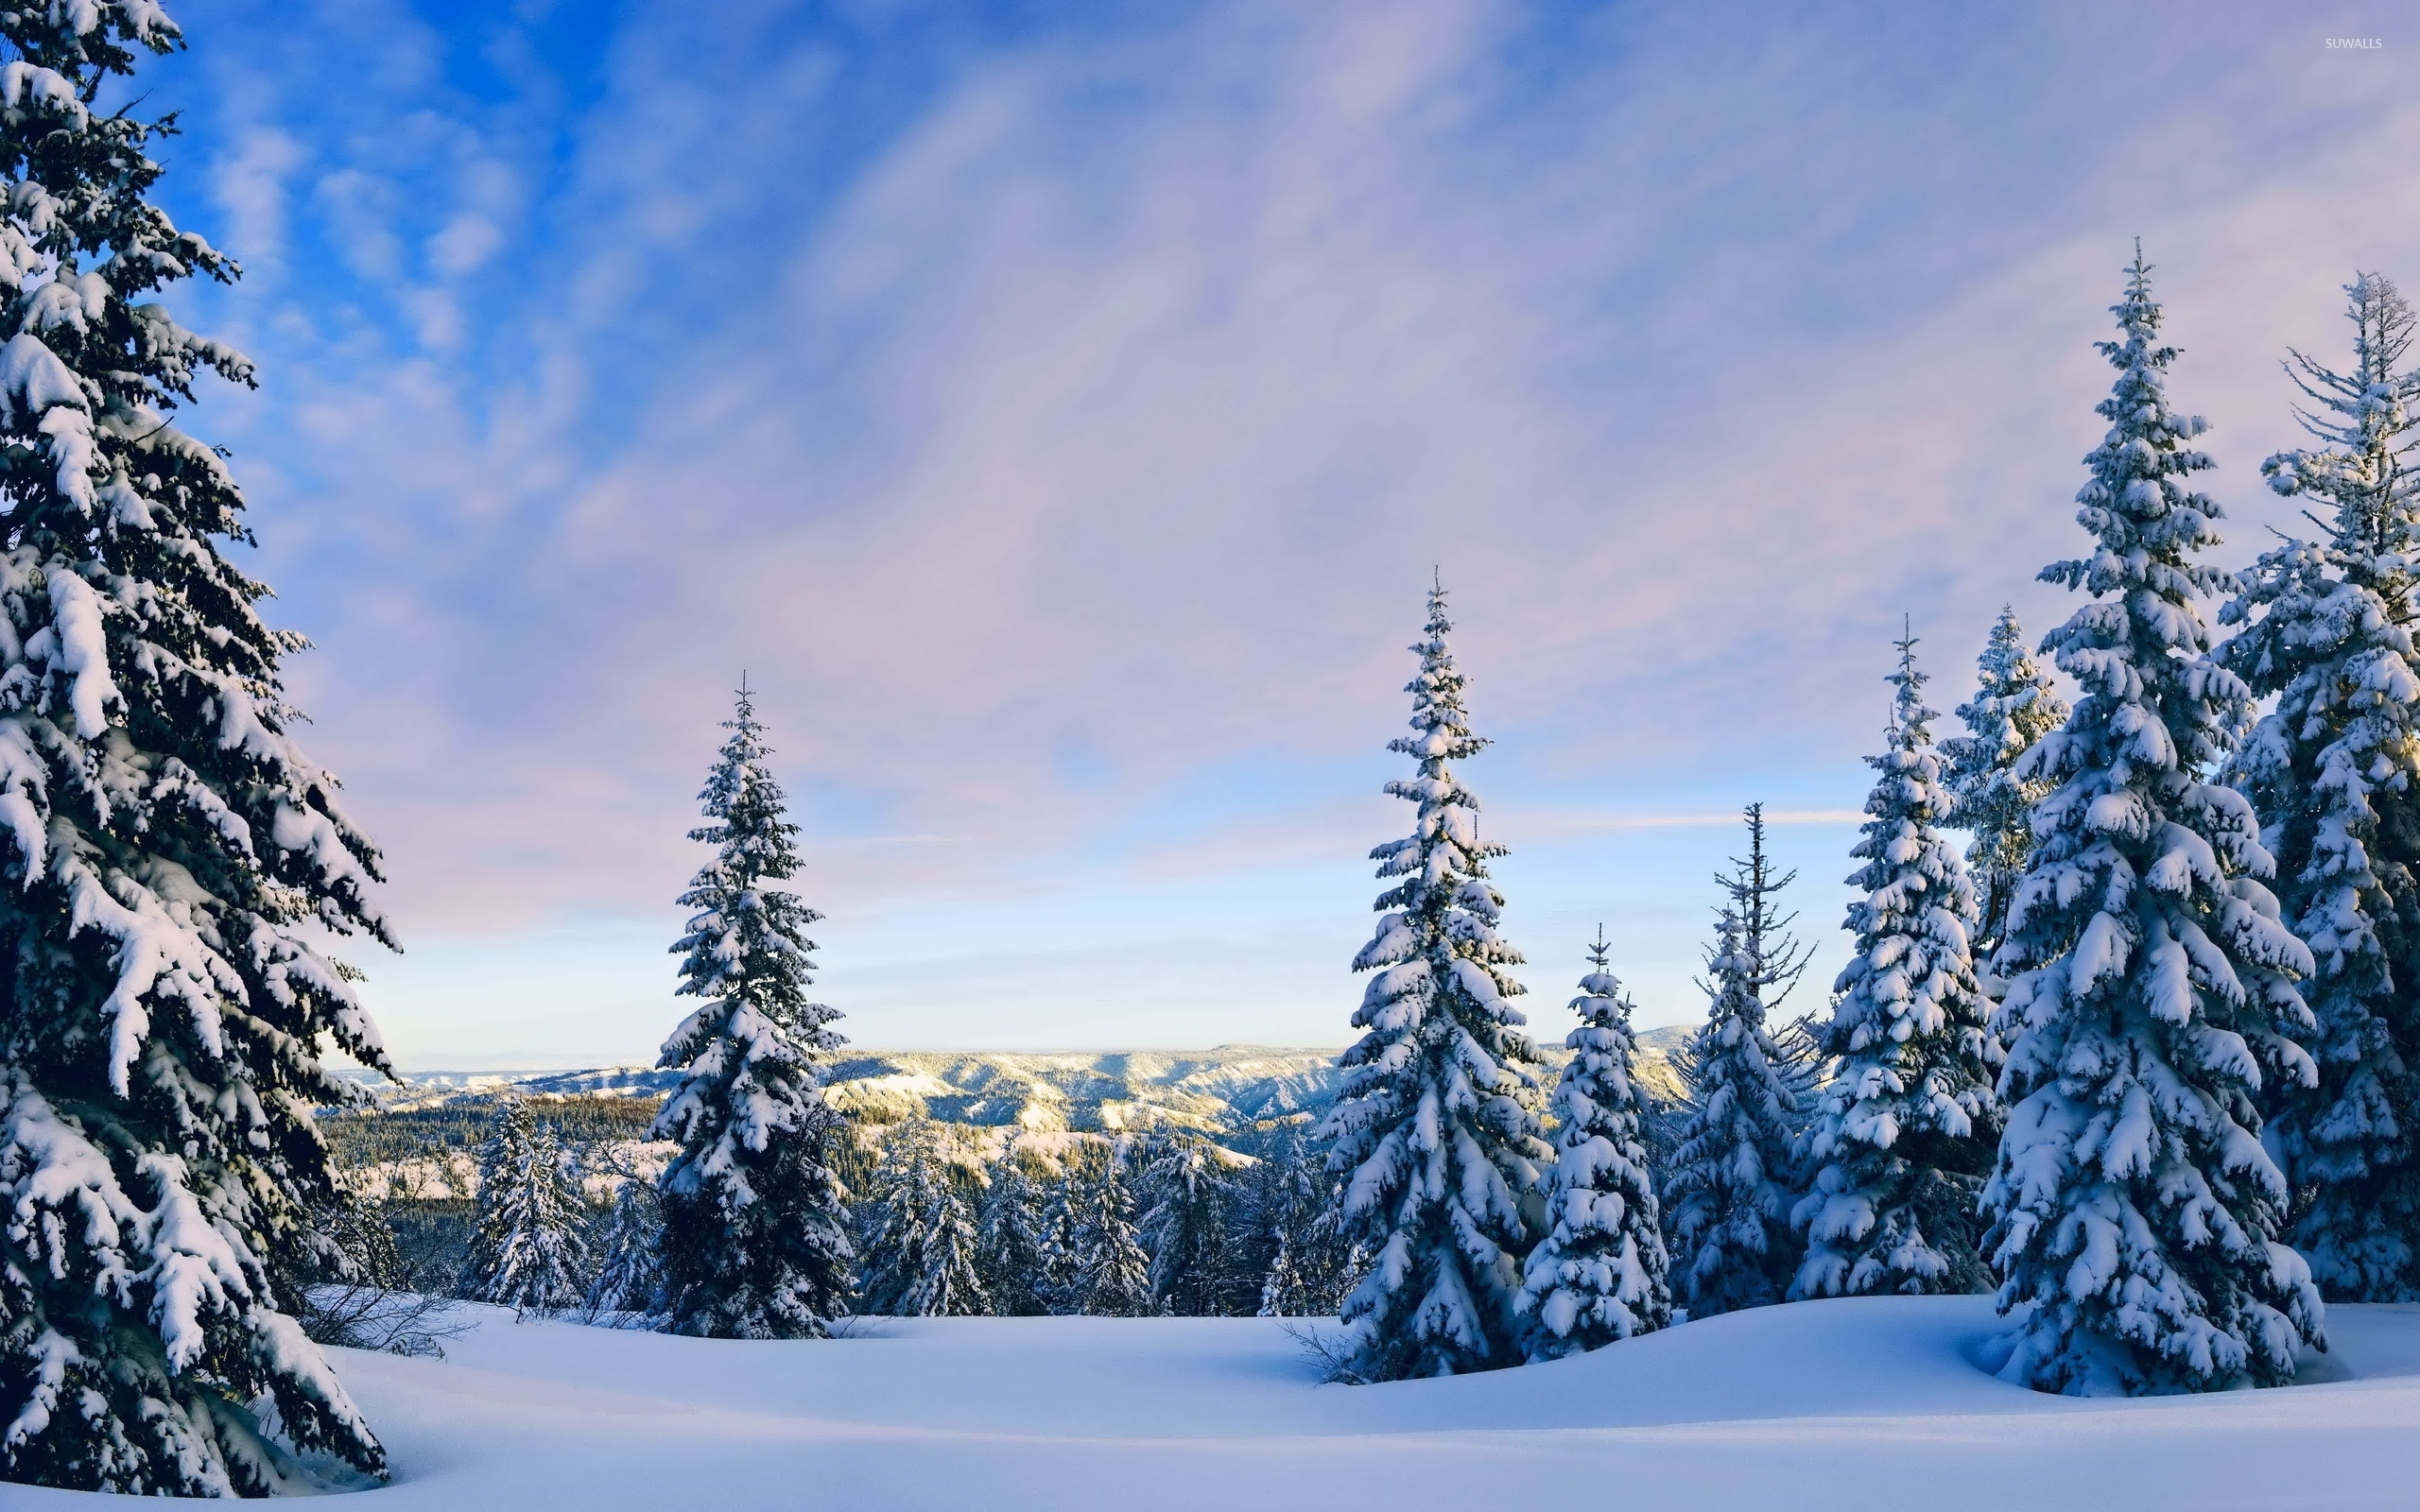 Snowy pine trees rising towards the sky wallpaper - Nature ...